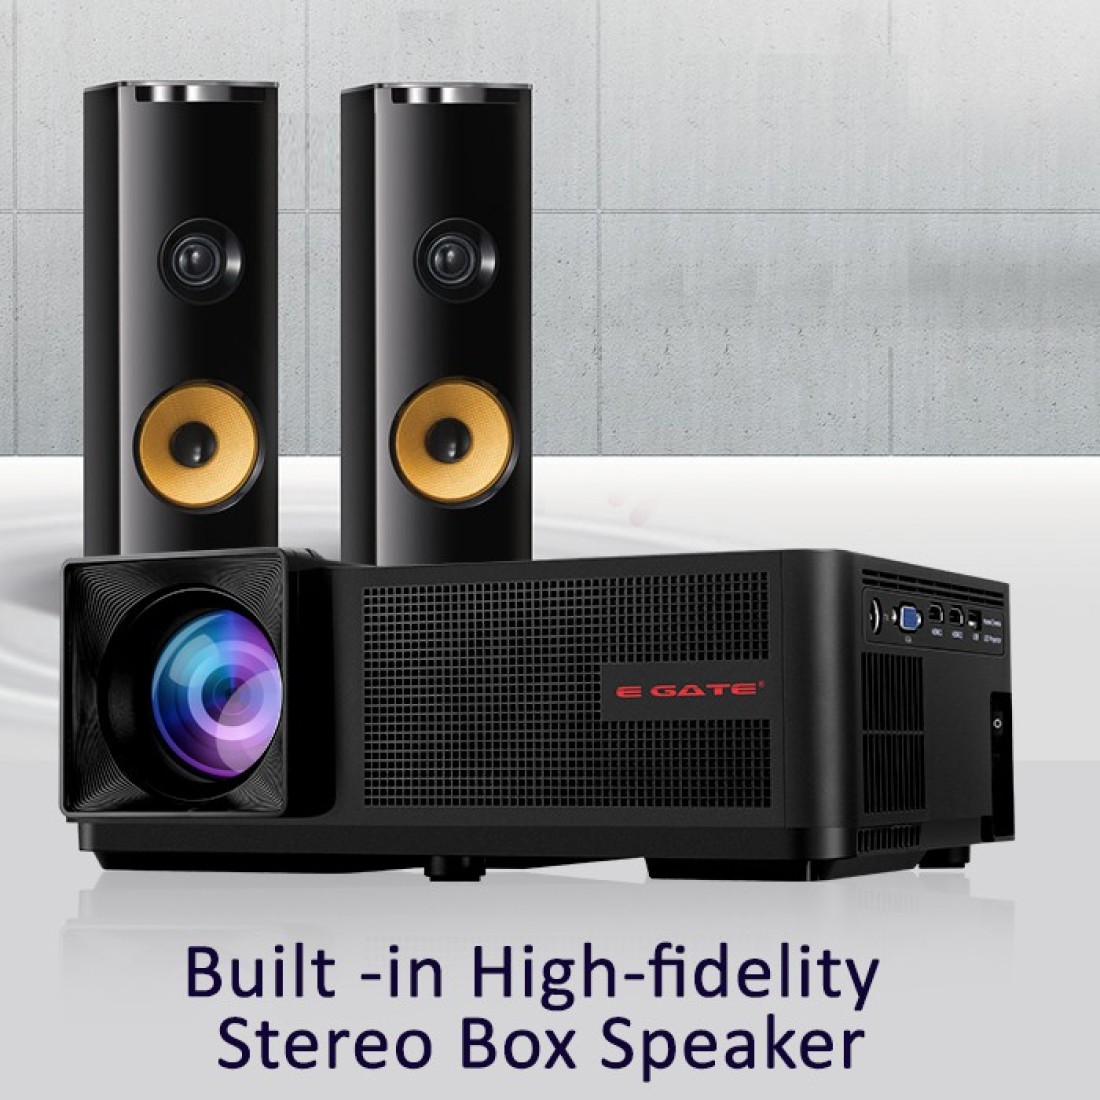 Egate P9 Led Hd 3600l 1280 X 800 Projector Price In India Buy Egate P9 Led Hd 3600l 1280 X 800 Projector Online At Flipkart Com